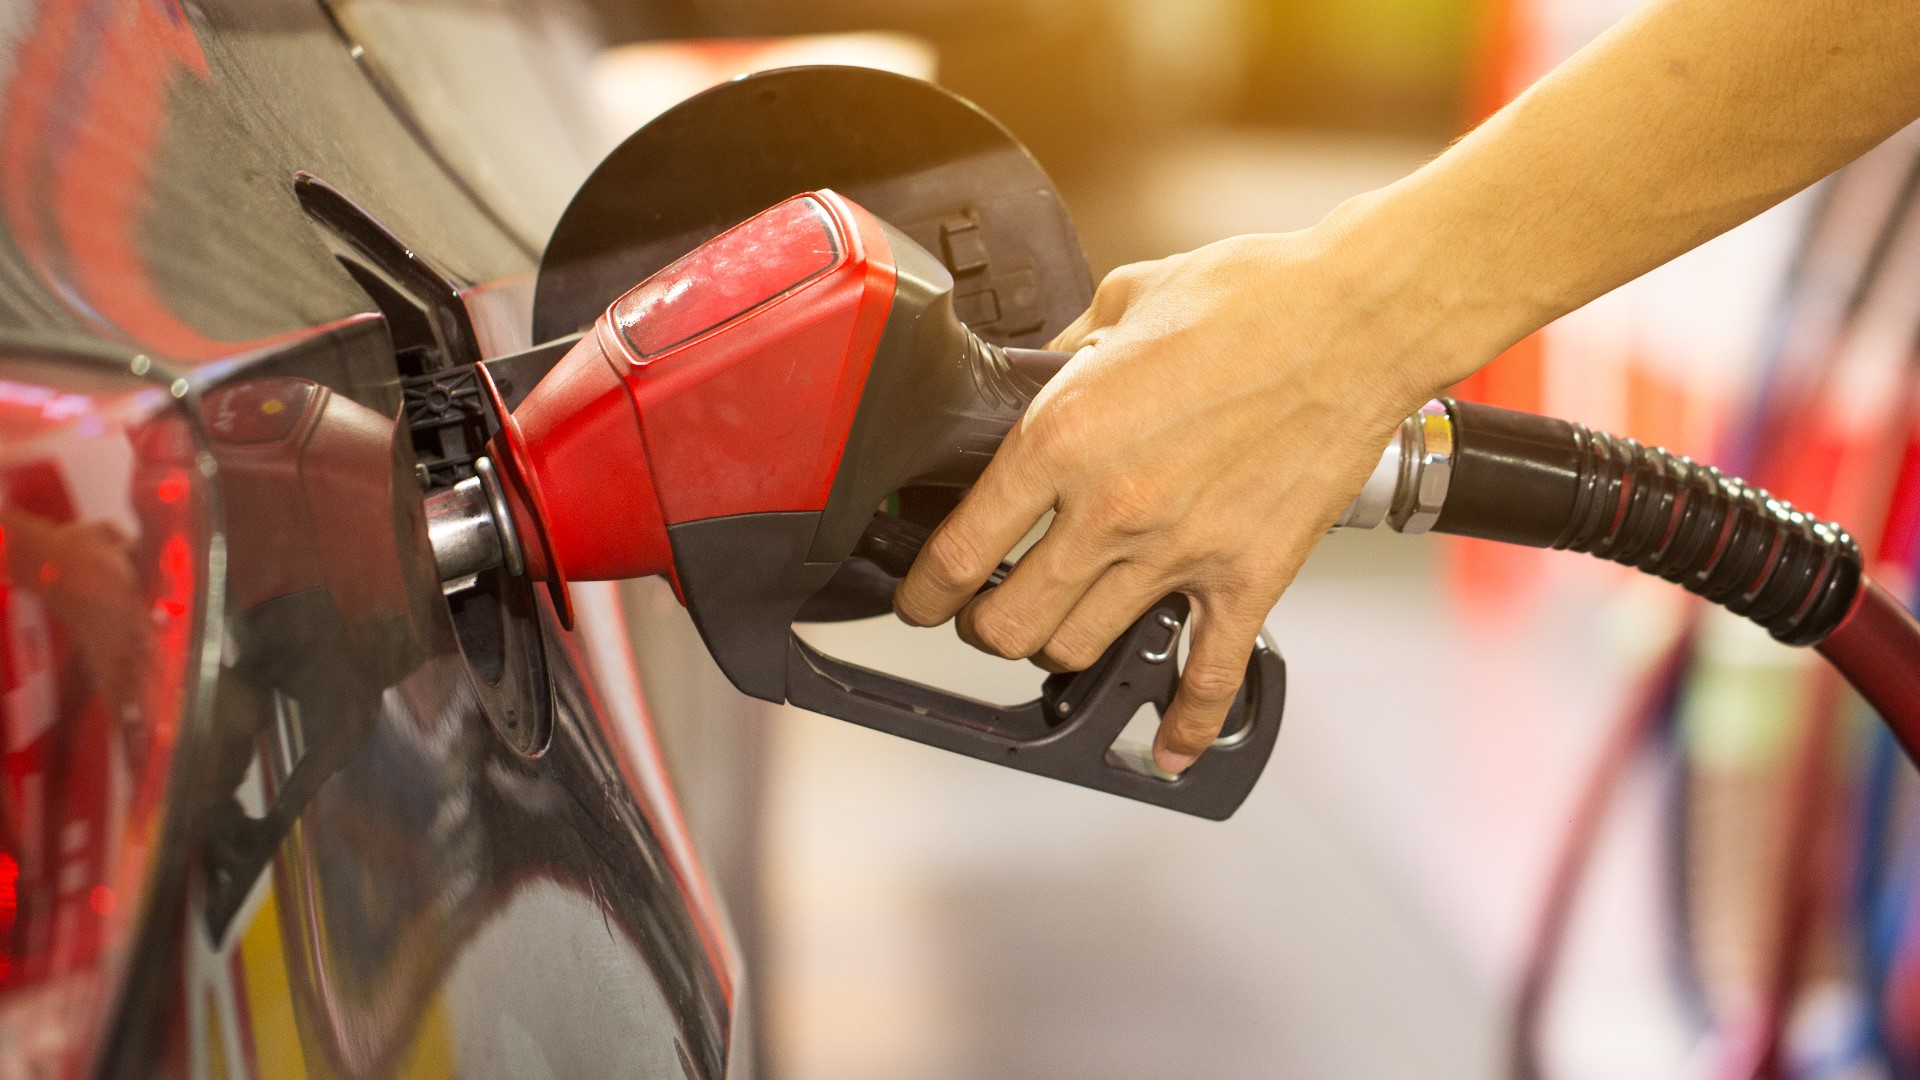 If walking, biking, public transit or a new car aren't options to fight rising gas prices, here are tips to maximize gas mileage in your vehicle.